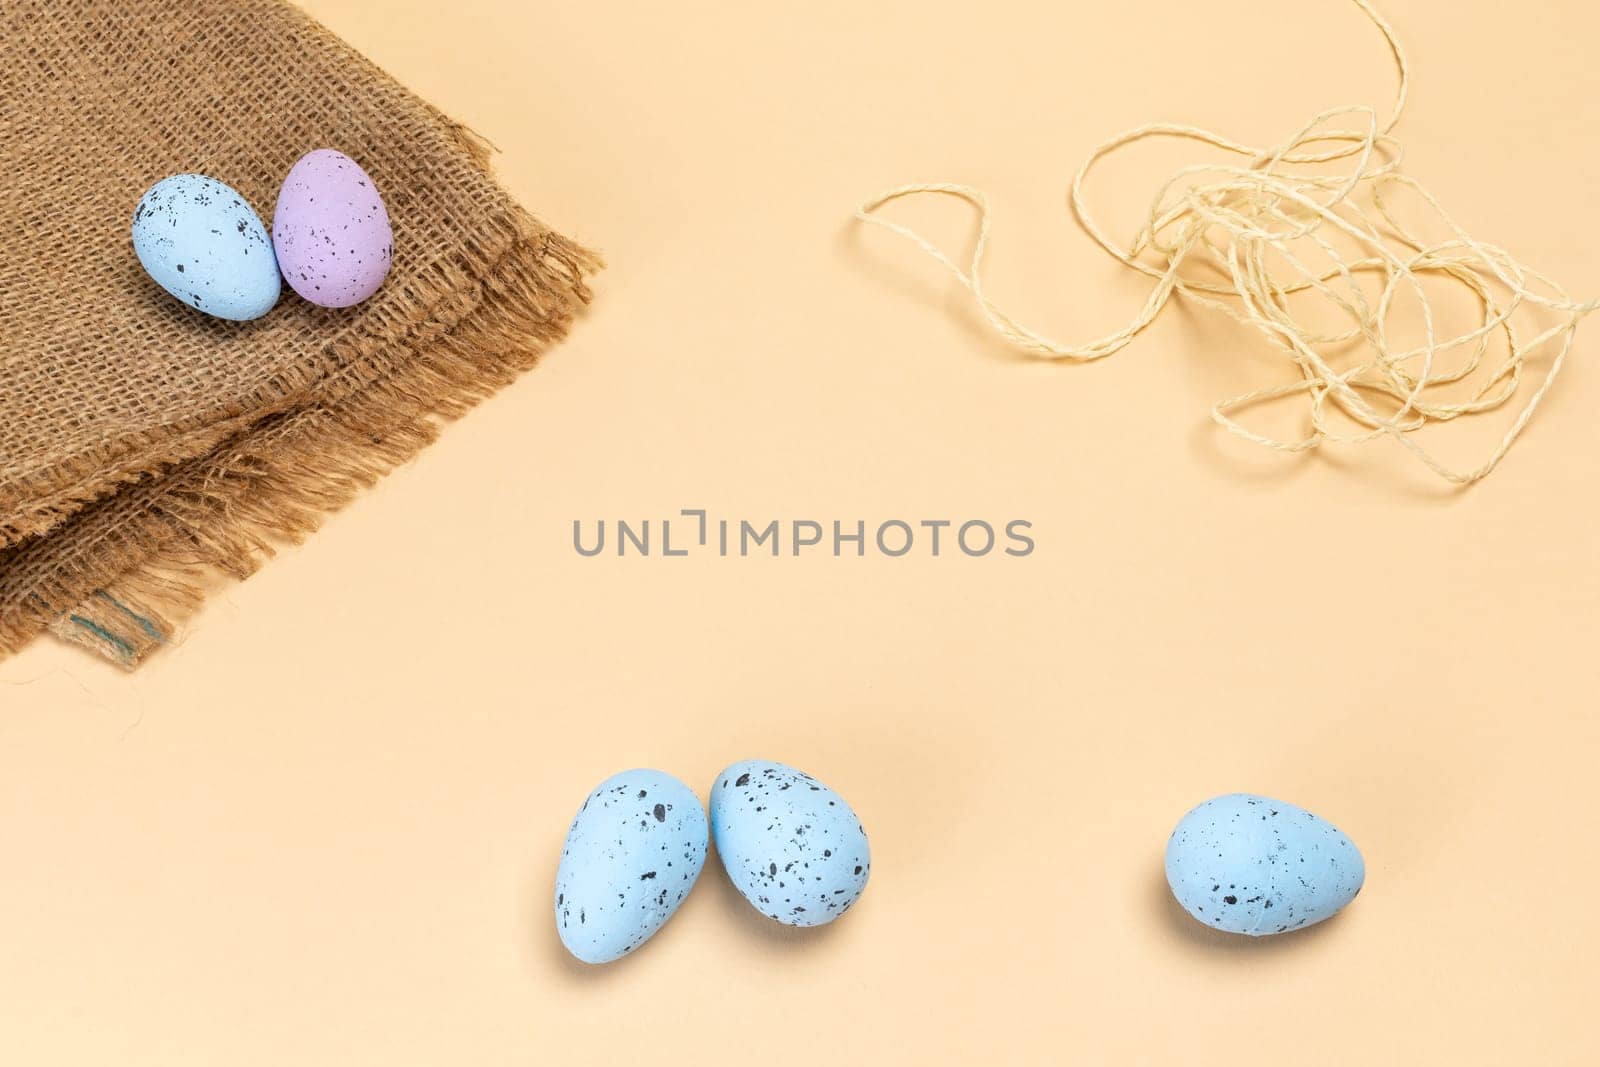 Colored Easter eggs with a sackcloth bag and a rope on the beige background. Top view.